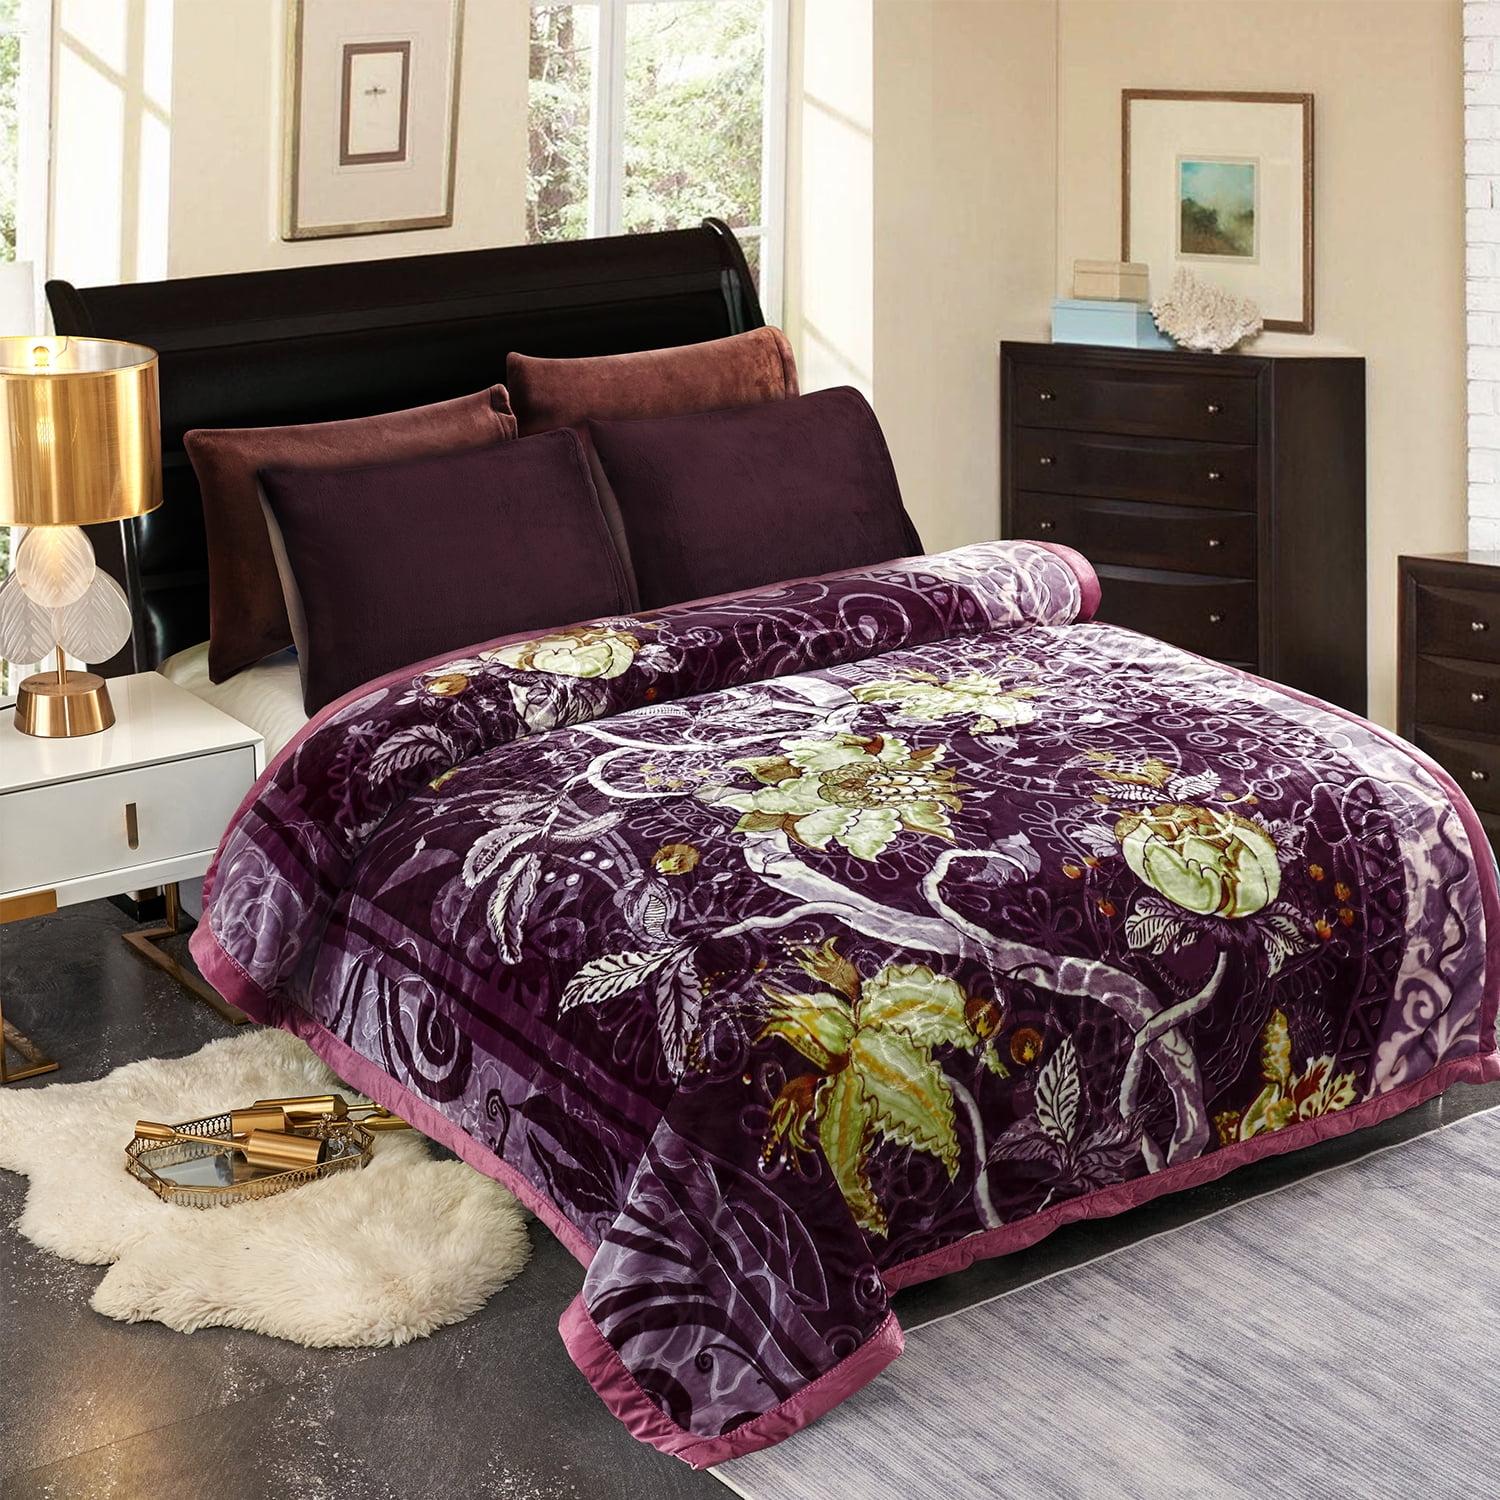 NC Fleece Bed Blanket Queen ,2 Ply Soft Warm Plush Blanket,Purple Floral,79 inch x 89 inch,5.3lb